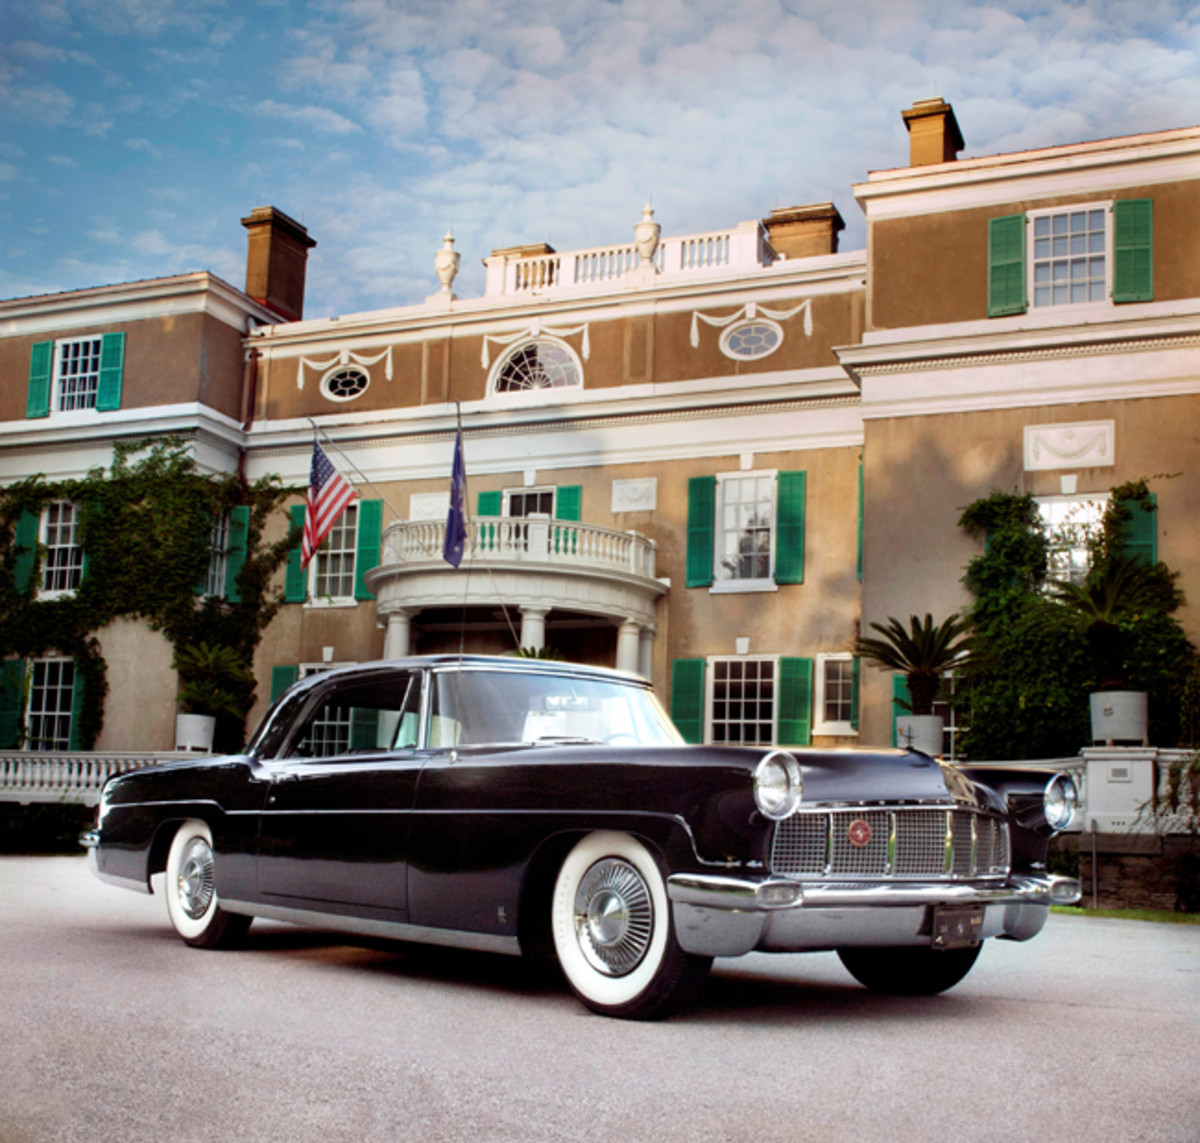  Joe & Mae Armstrong’s timelessly styled 1956 Continental Mark II hardtop coupe from Poughkeepsie, NY proudly occupies the forecourt of President Franklin D. Roosevelt’s Hyde Park, NY home “Springwood” in anticipation of the Lincoln & Continental Owners Club’s September 19th-22th, 2019 Eastern National Meet in the Historic Hudson Valley.